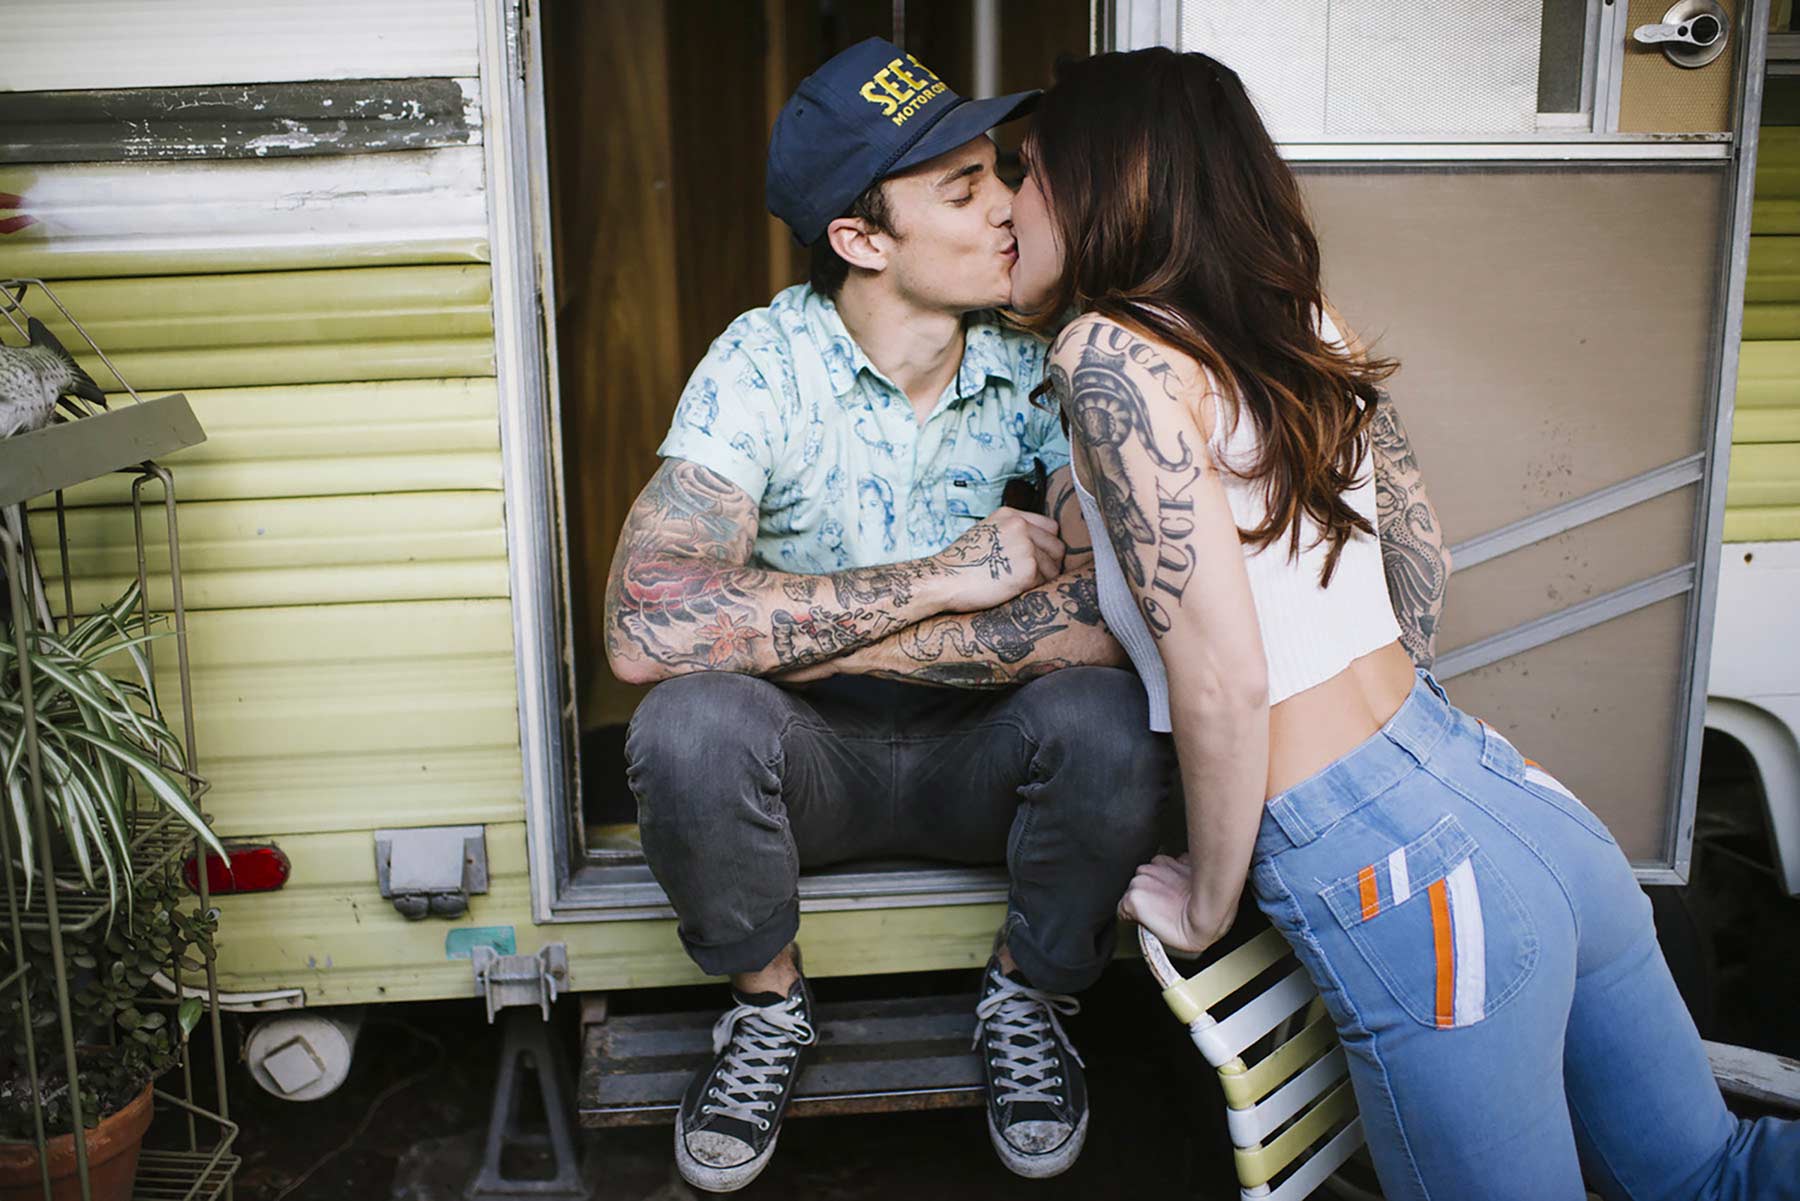 Unconquered creative agency uses emotive content marketing to connect to consumers like this photo of a couple kissing.